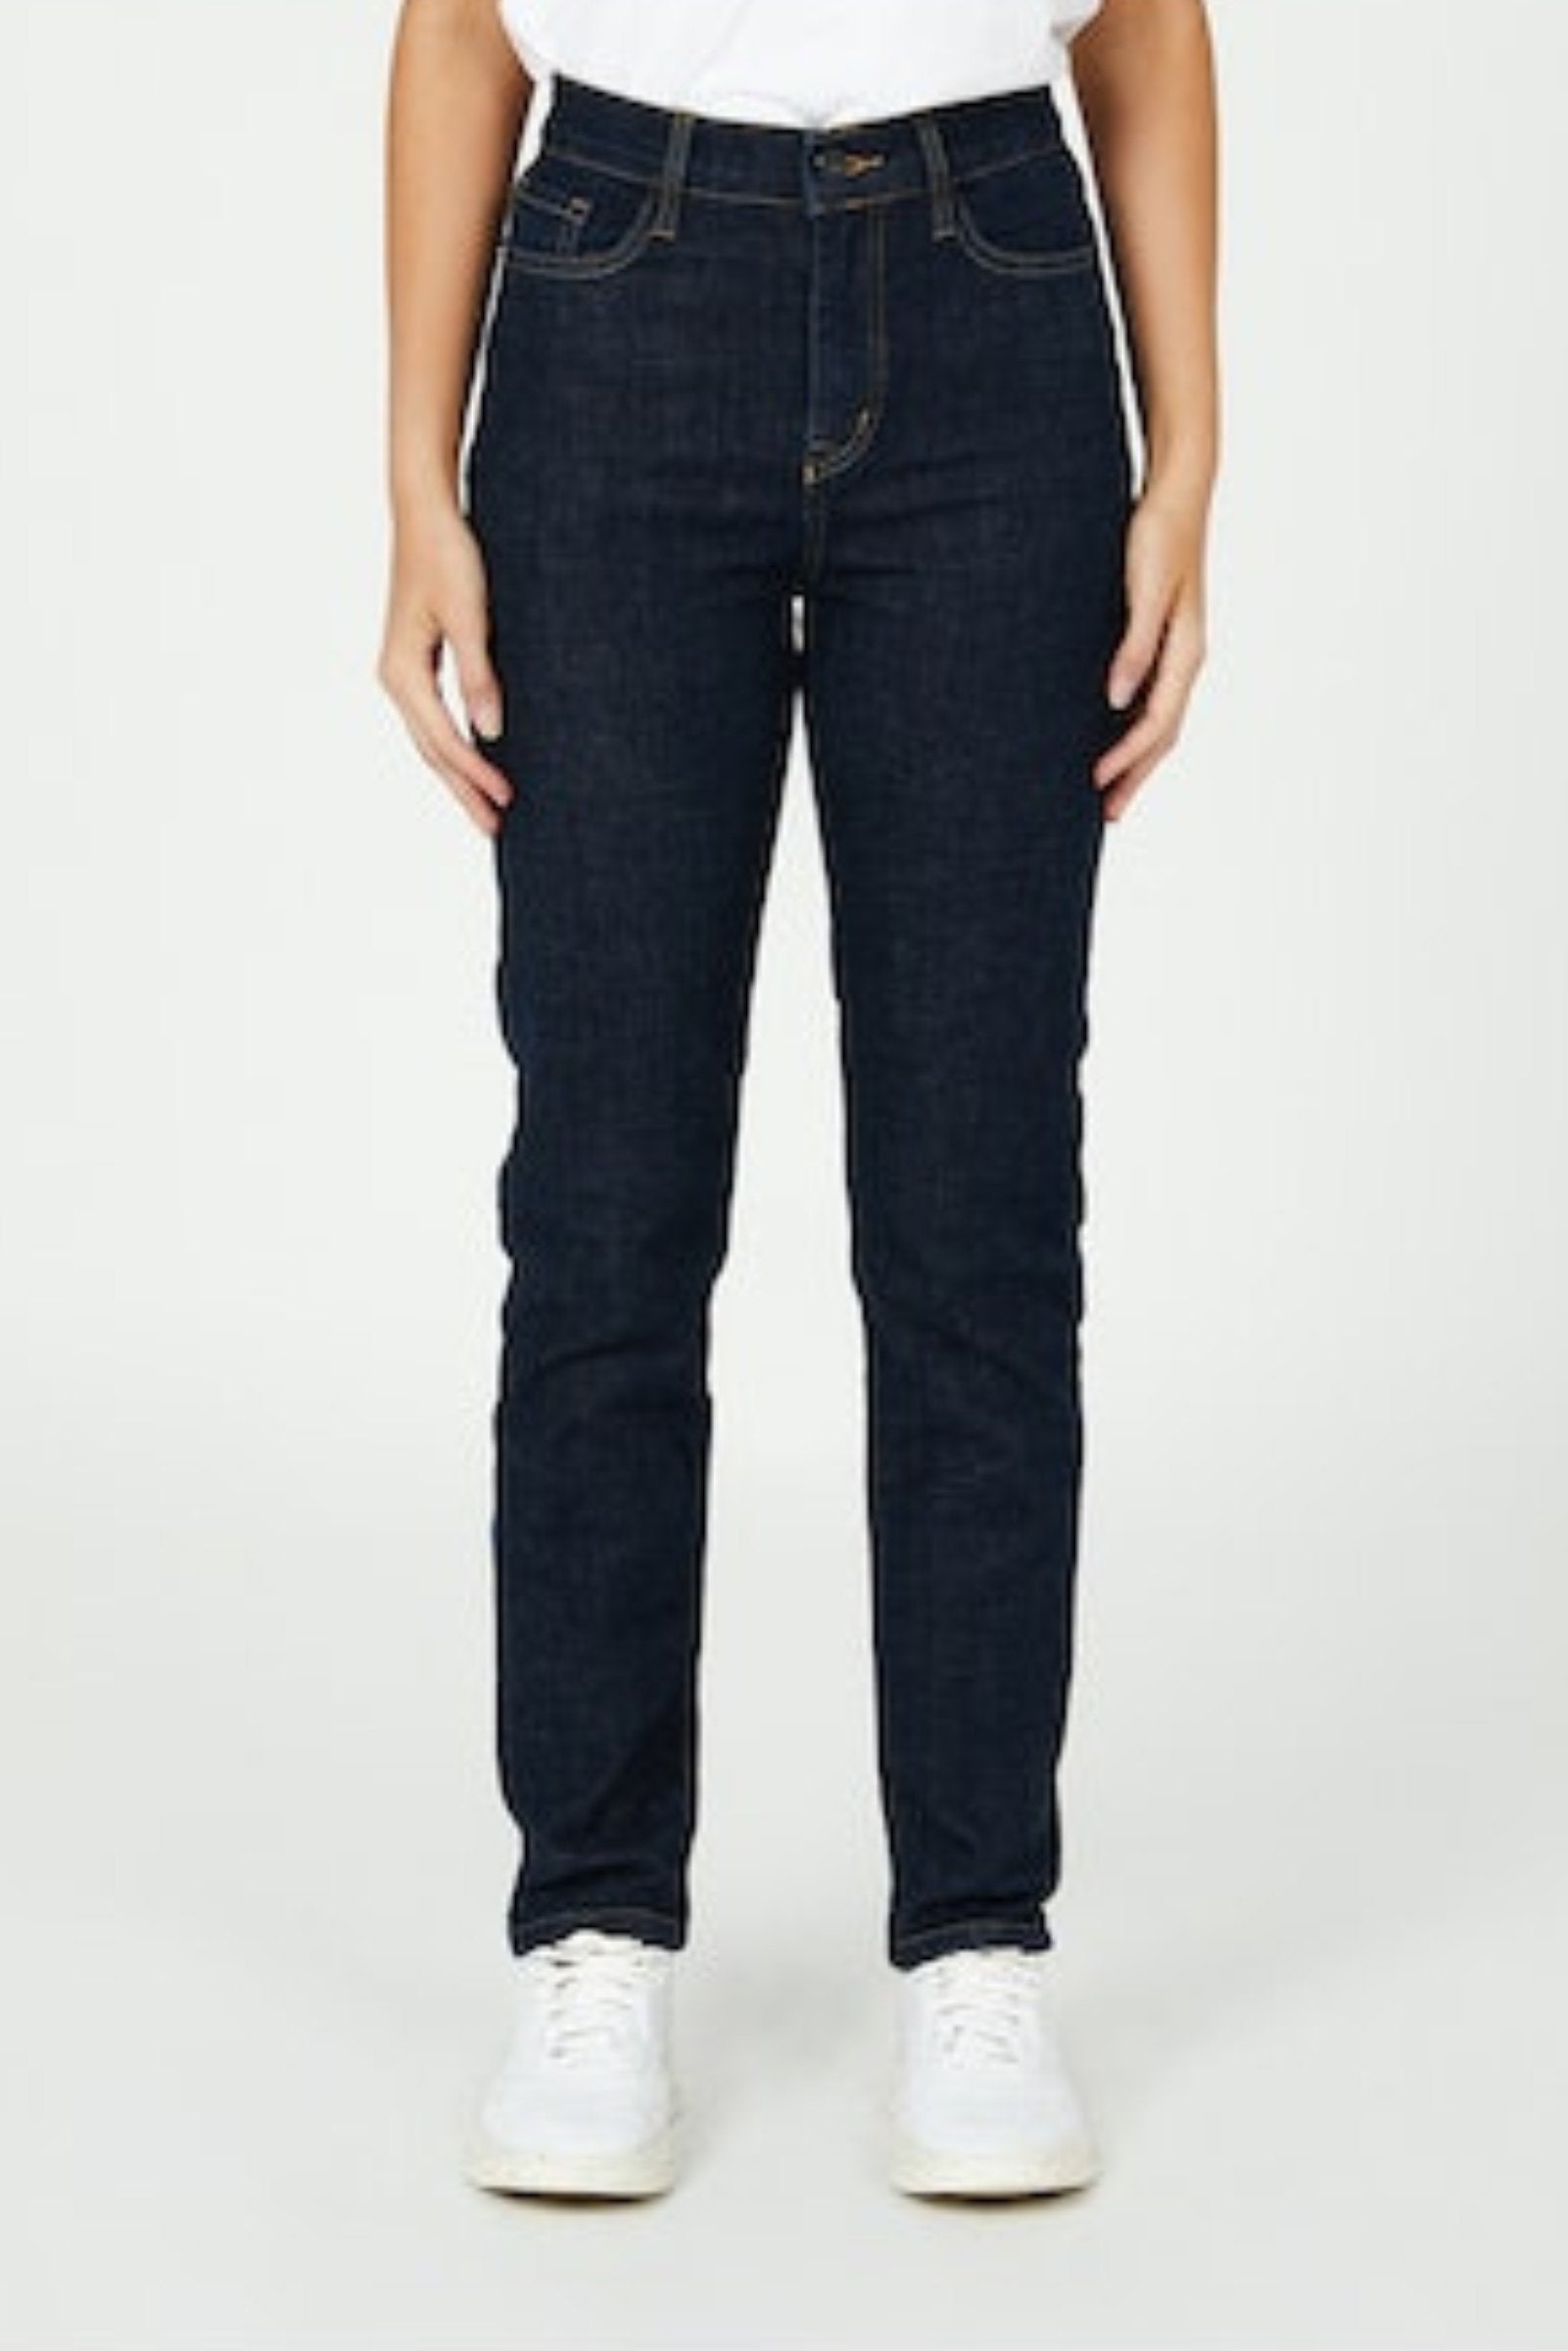 Outland Lucy Jeans - Stellar - Outland - Coko